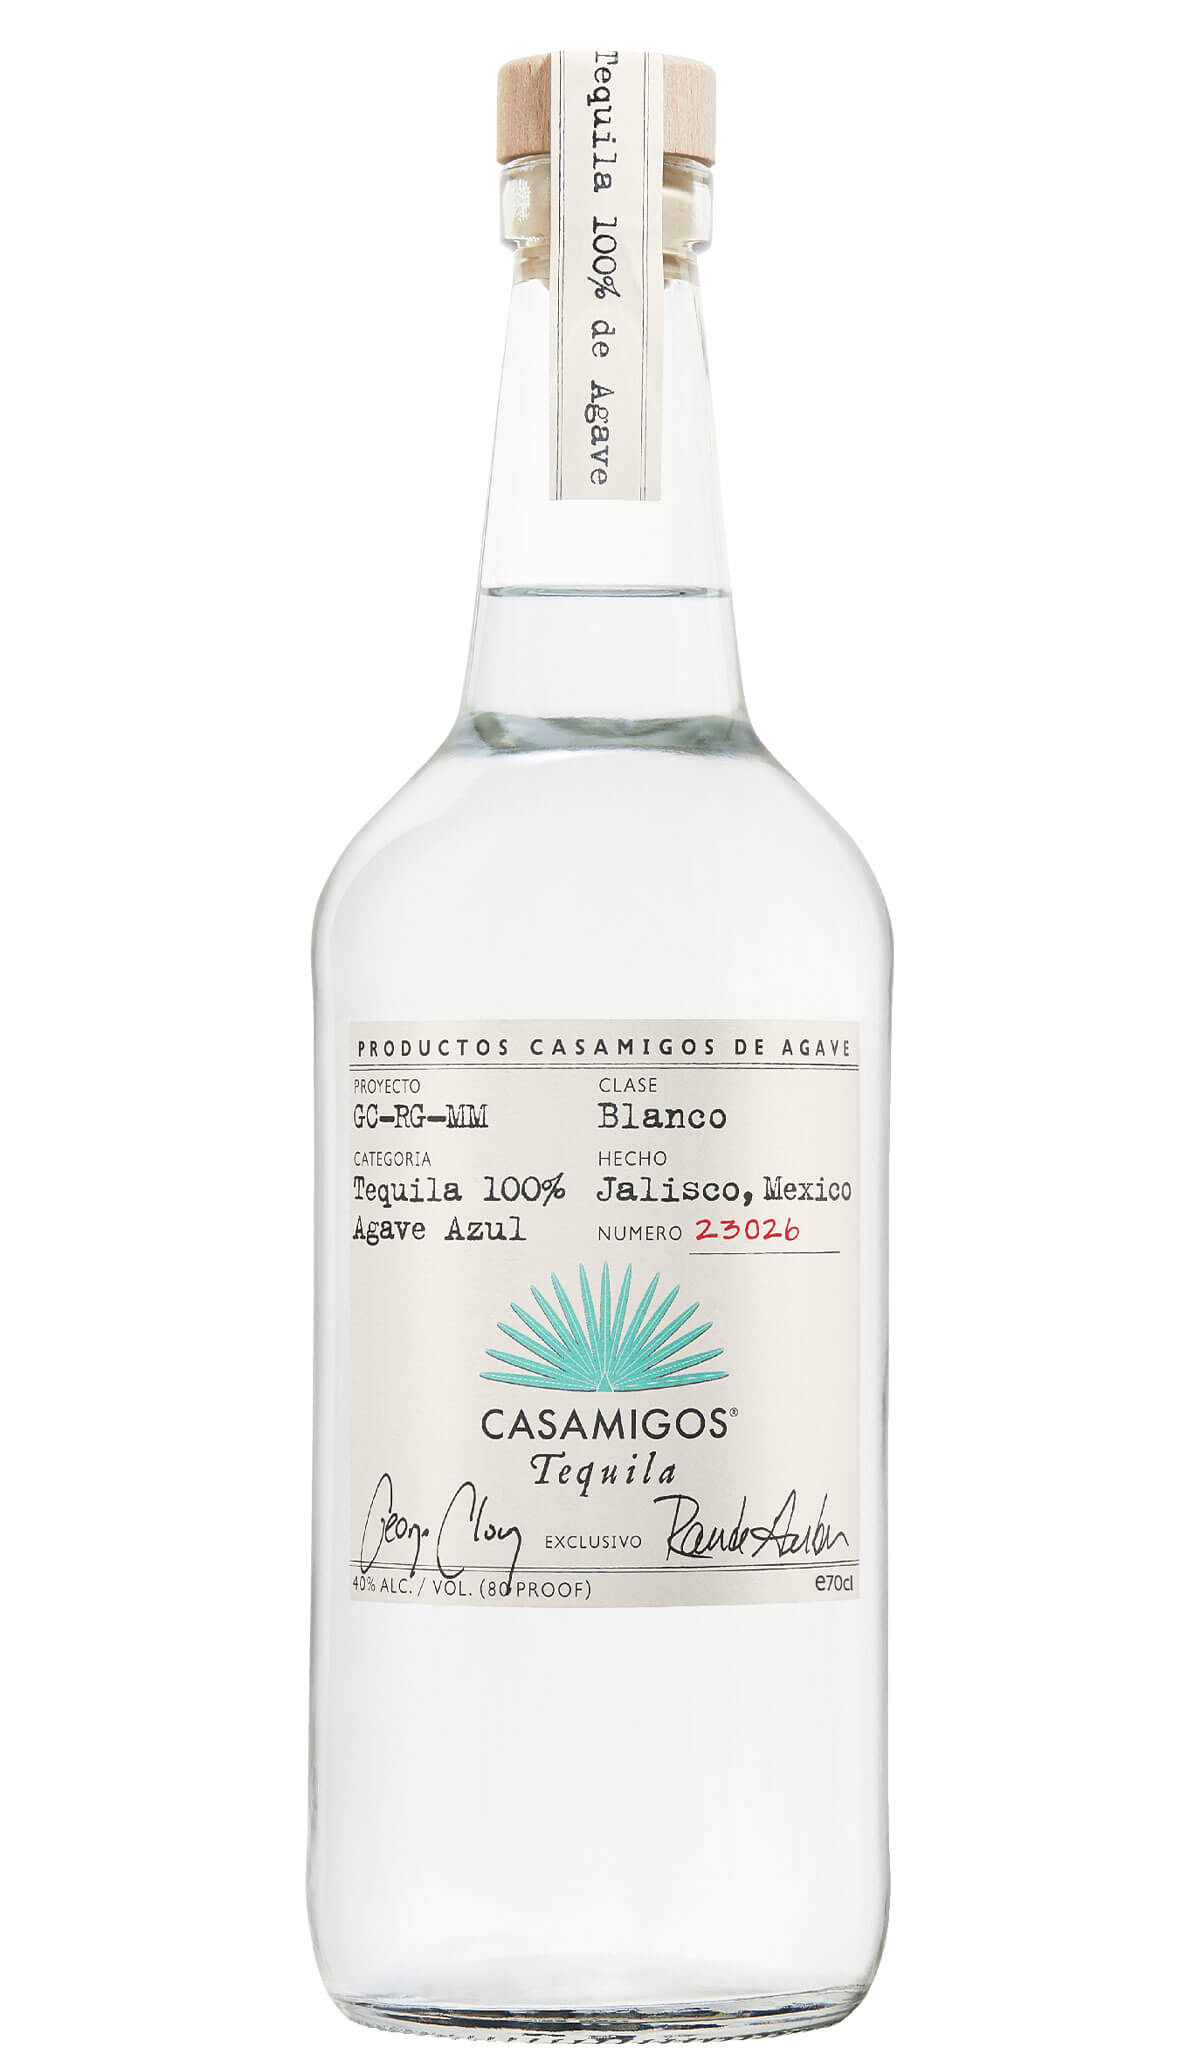 Find out more, explore the range and buy Casamigos Blanco Tequila 700ml available online at Wine Sellers Direct - Australia's independent liquor specialists.